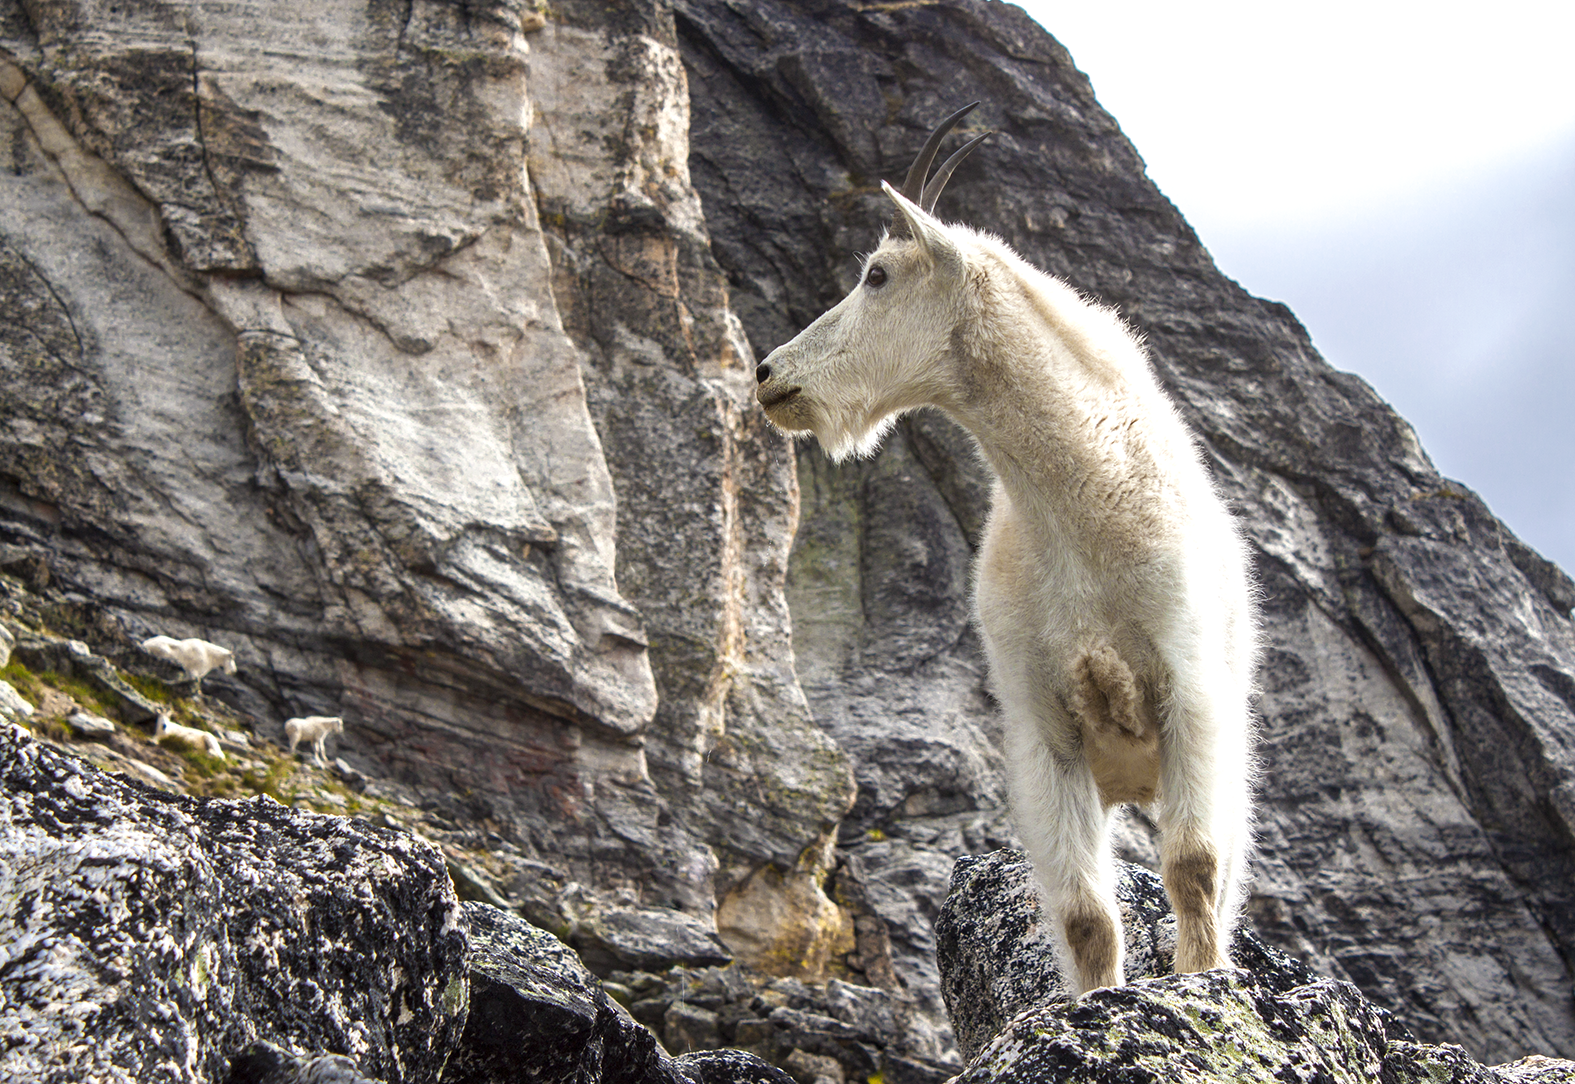 A furry white goat perched on a rock.